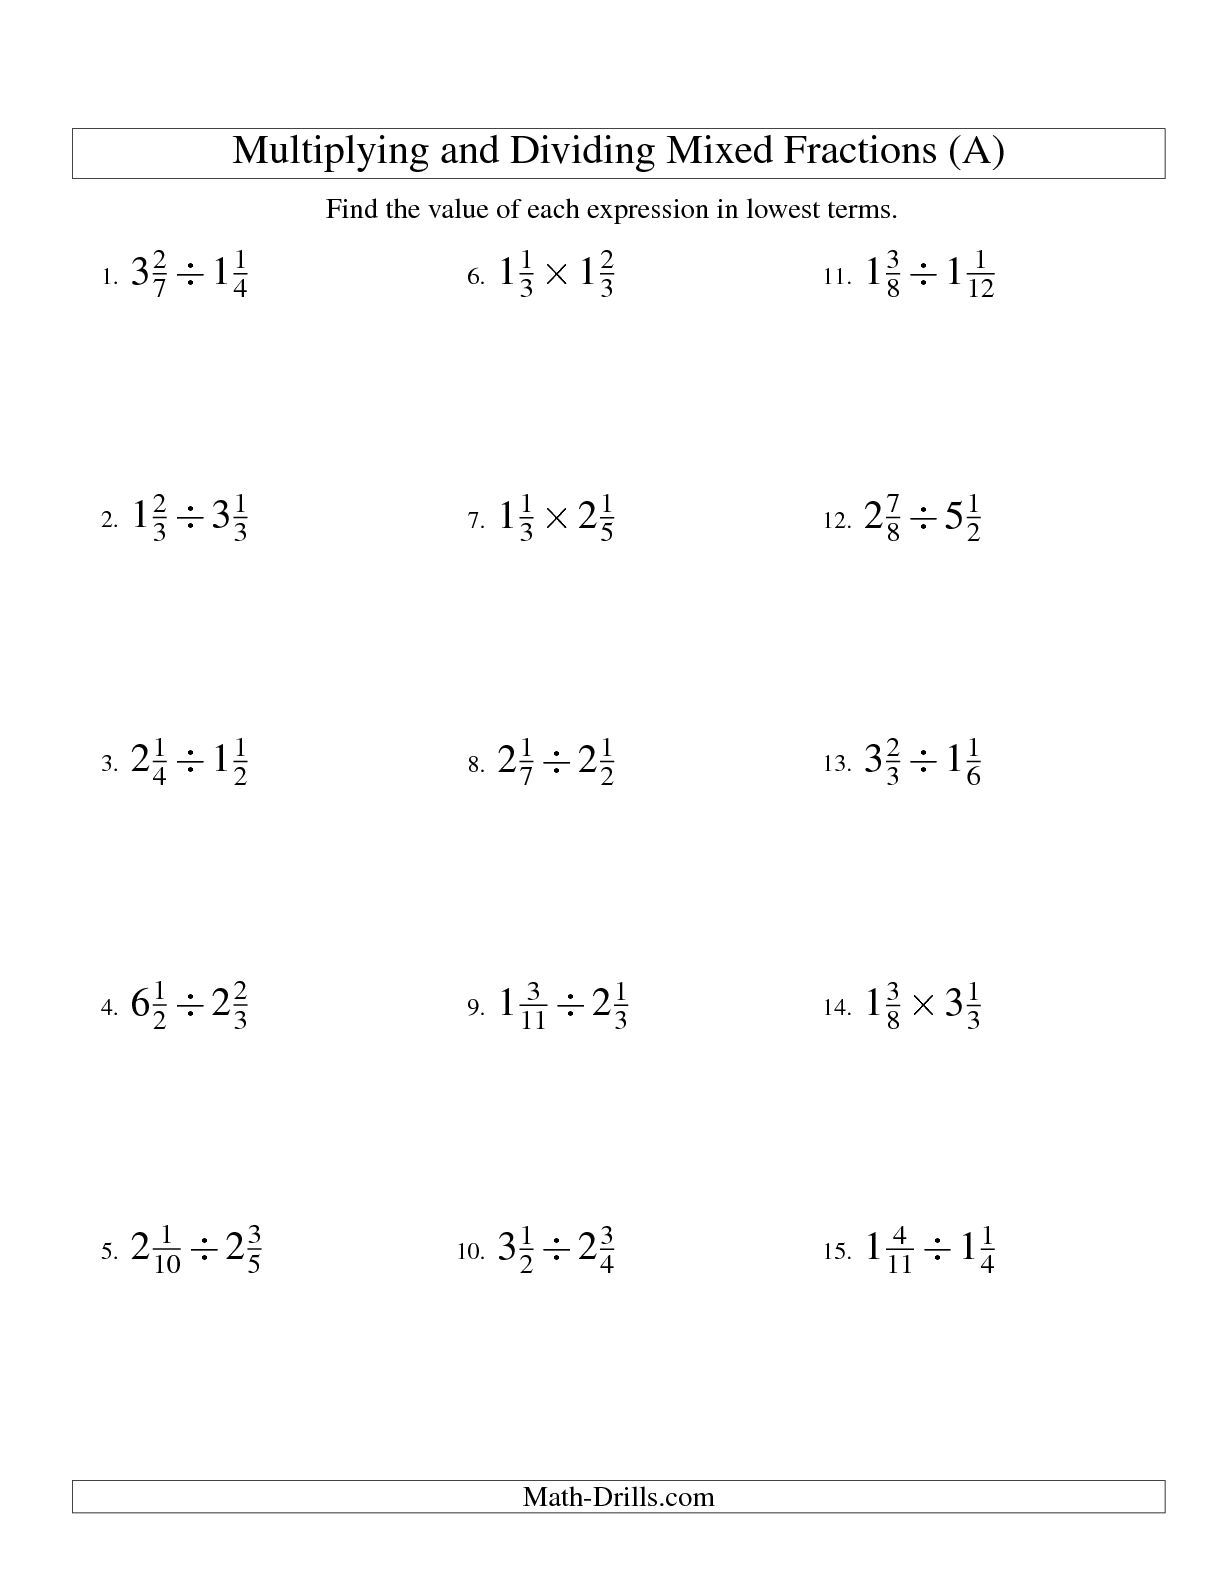 The Multiplying and Dividing Mixed Fractions (A) math worksheet from